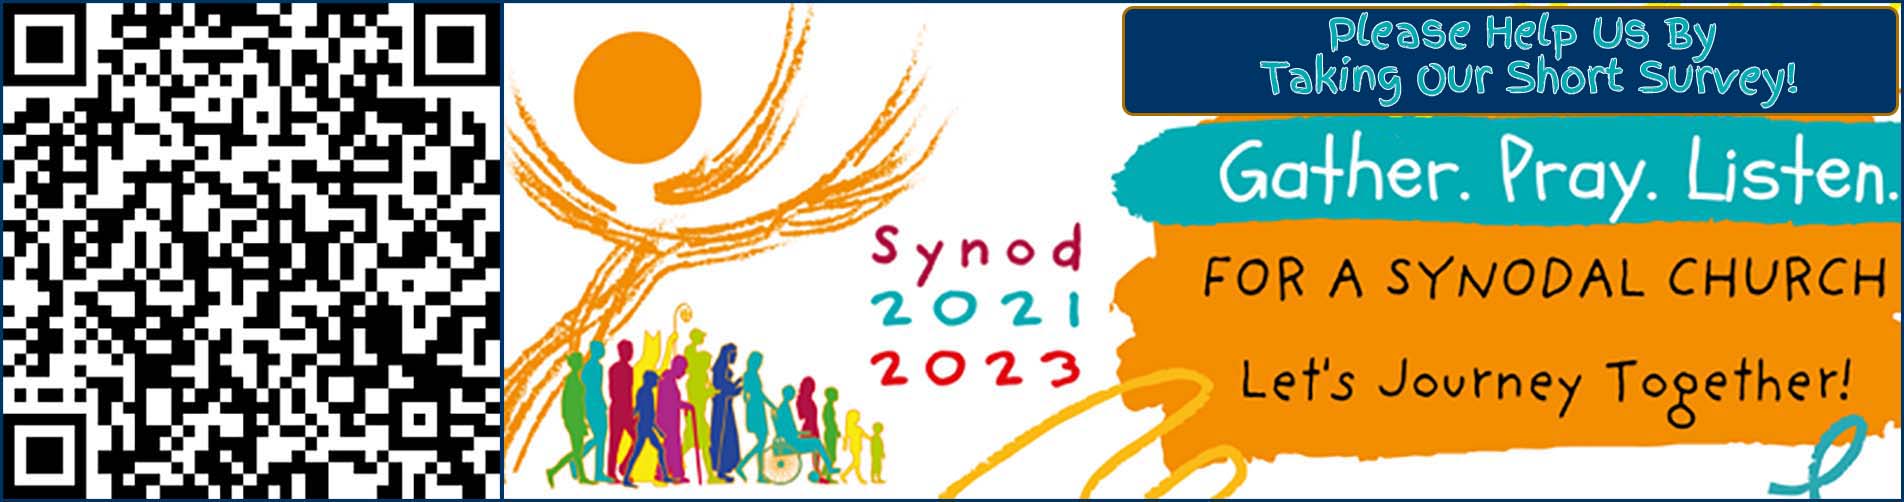 large beautiful banner image of SYNOD 2022